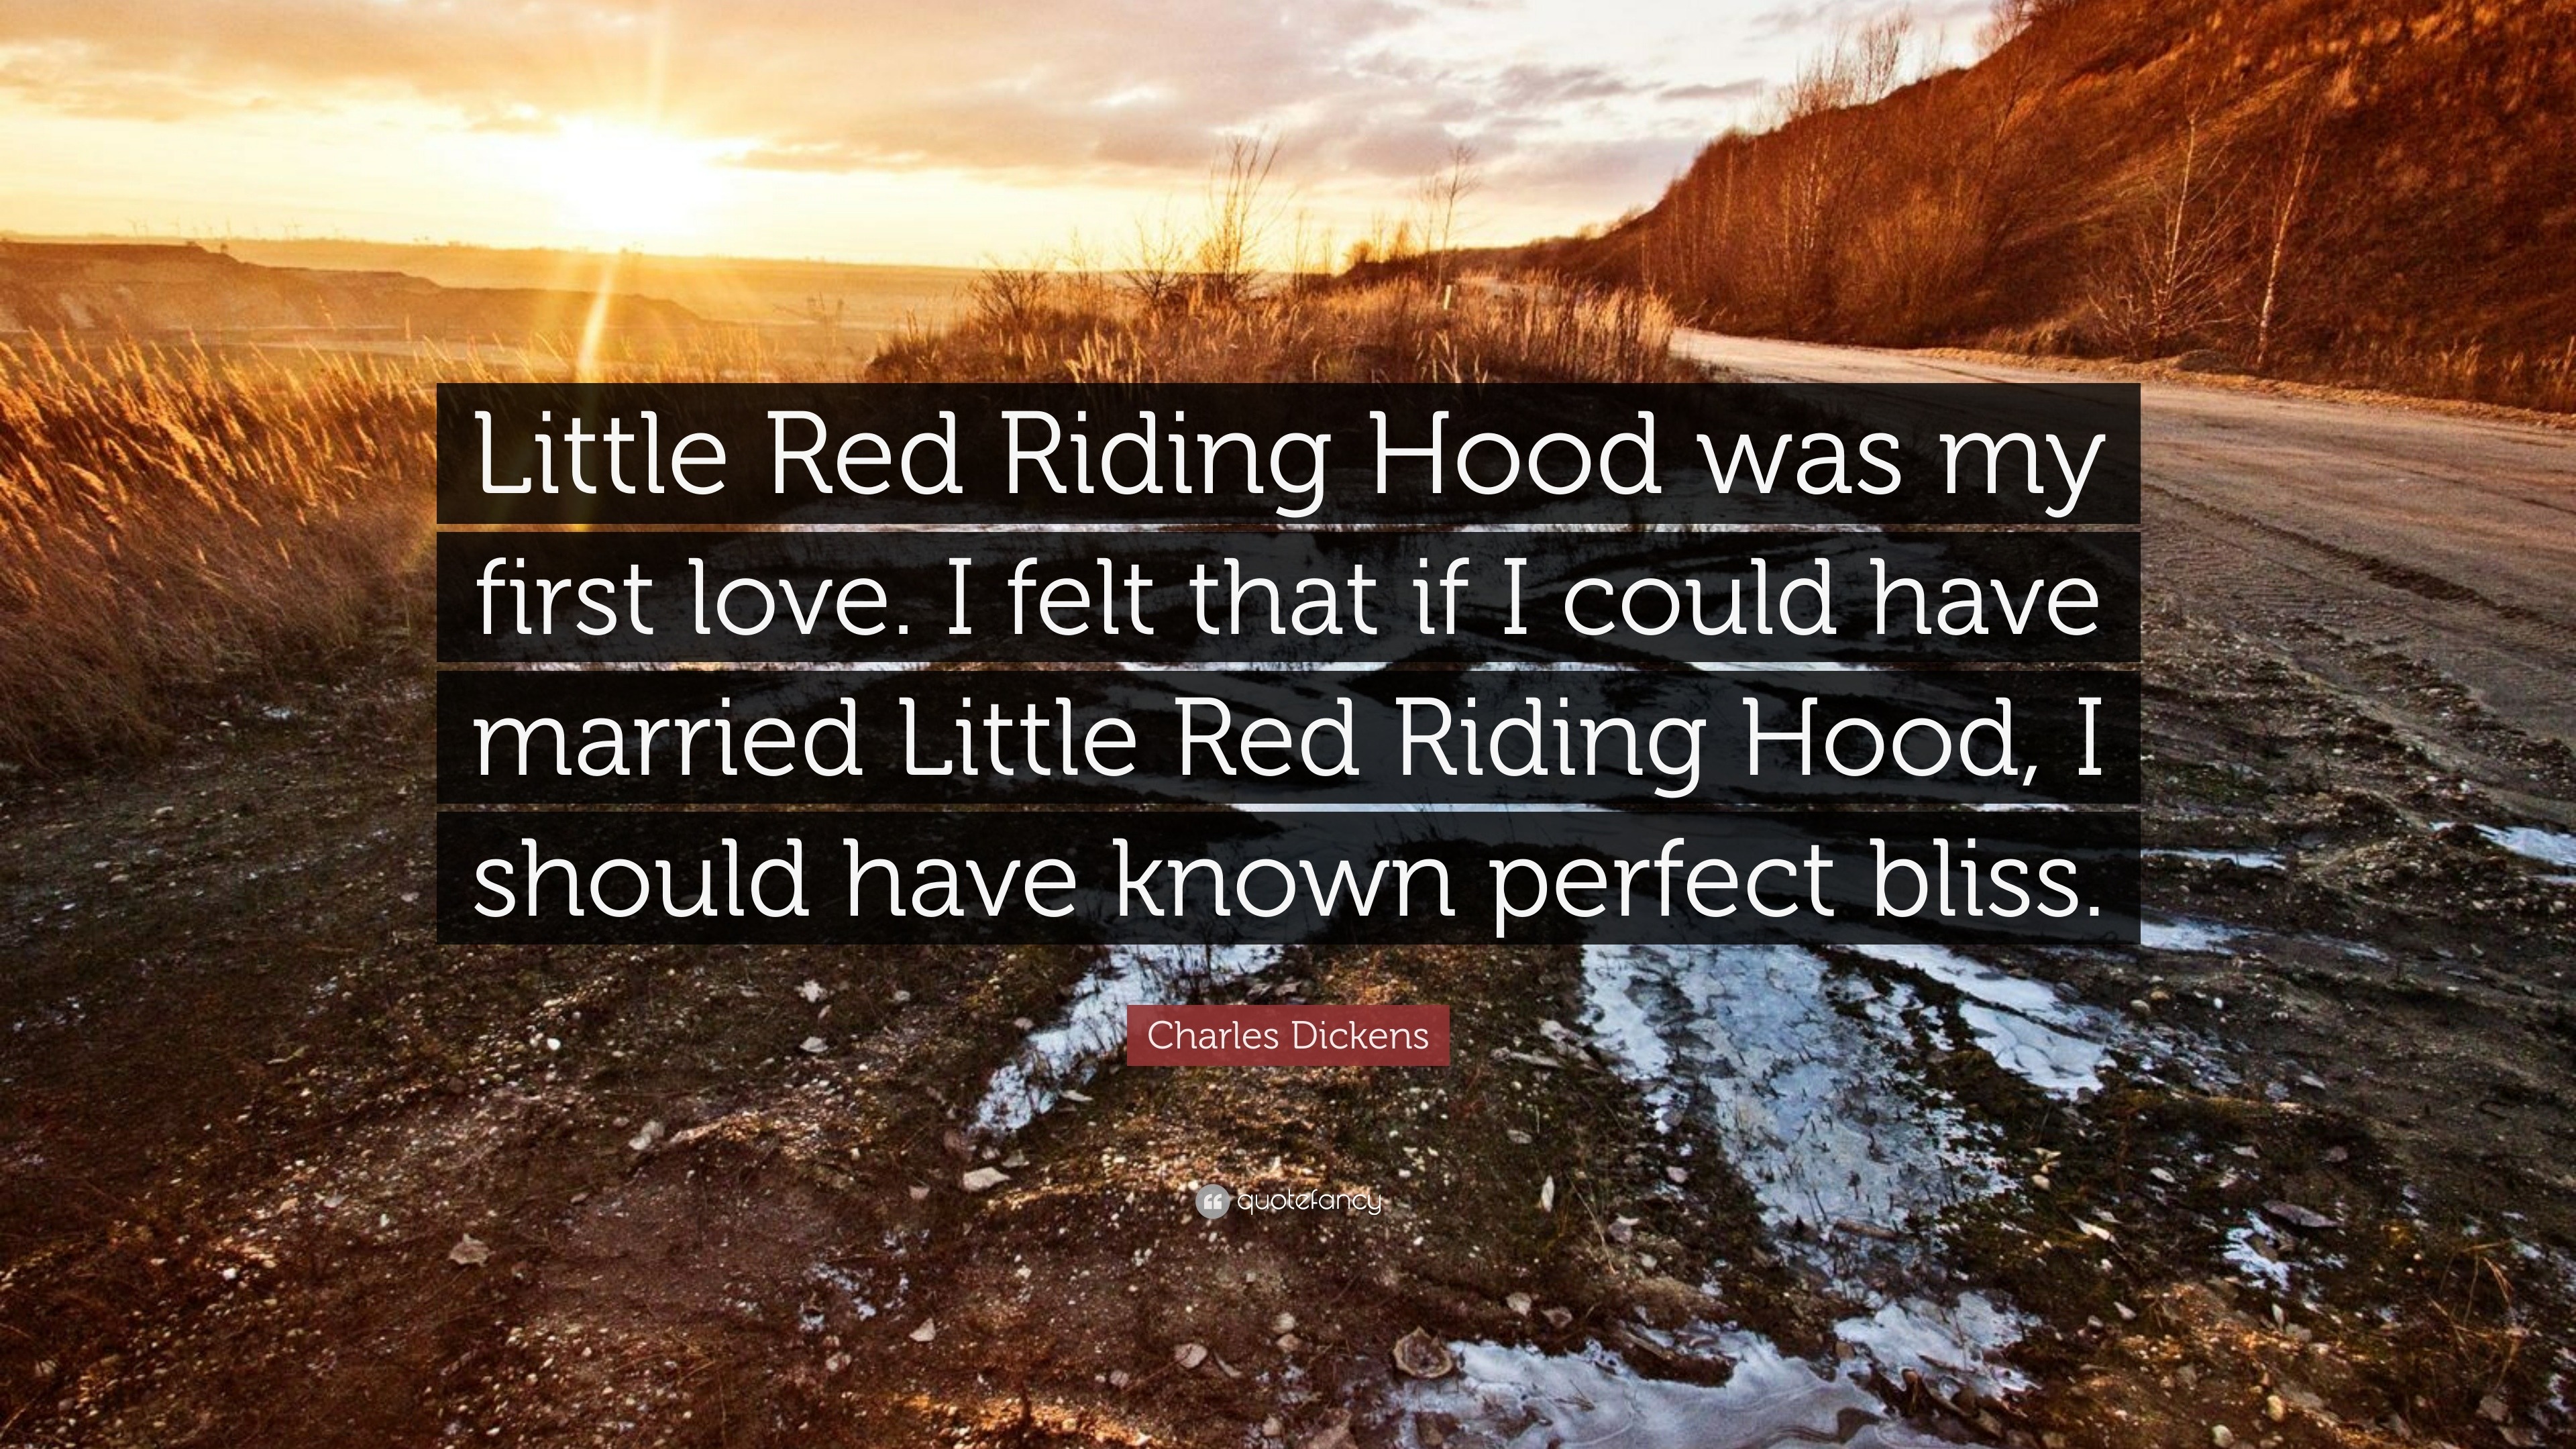 Charles Dickens Quote: “Little Red Riding Hood was my first love. I